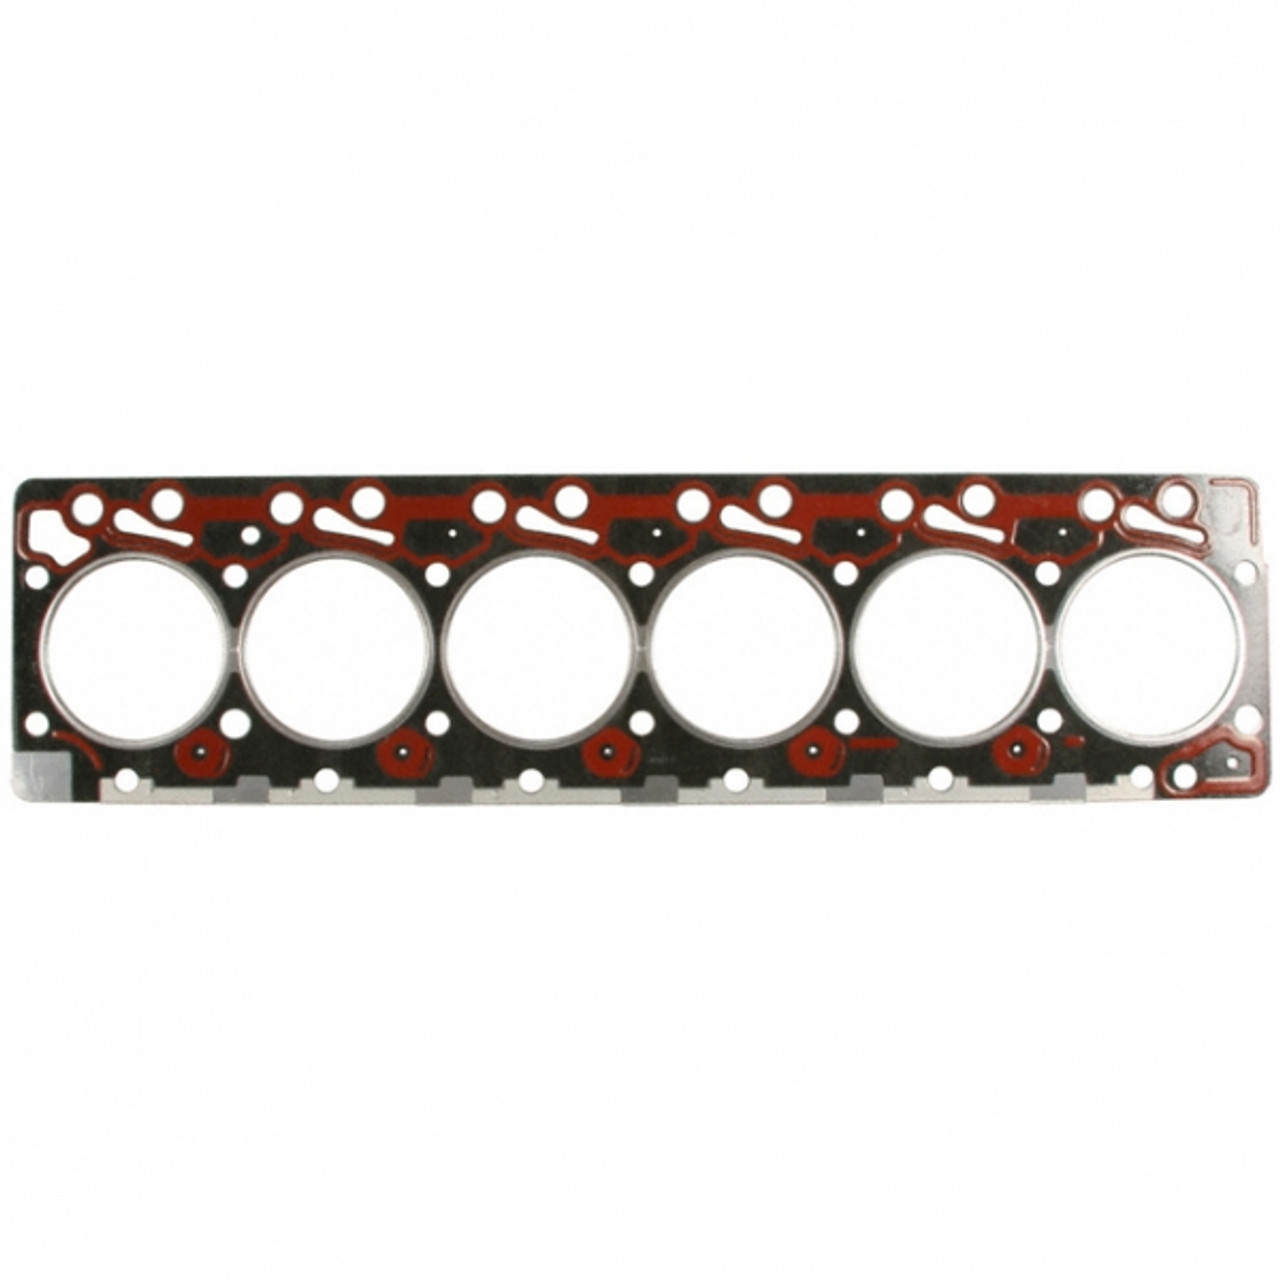 Mahle Cylinder Head Gasket 1989 to 1998 5.9L Cummins (Standard Thickness) (MCI4068C)-Main View